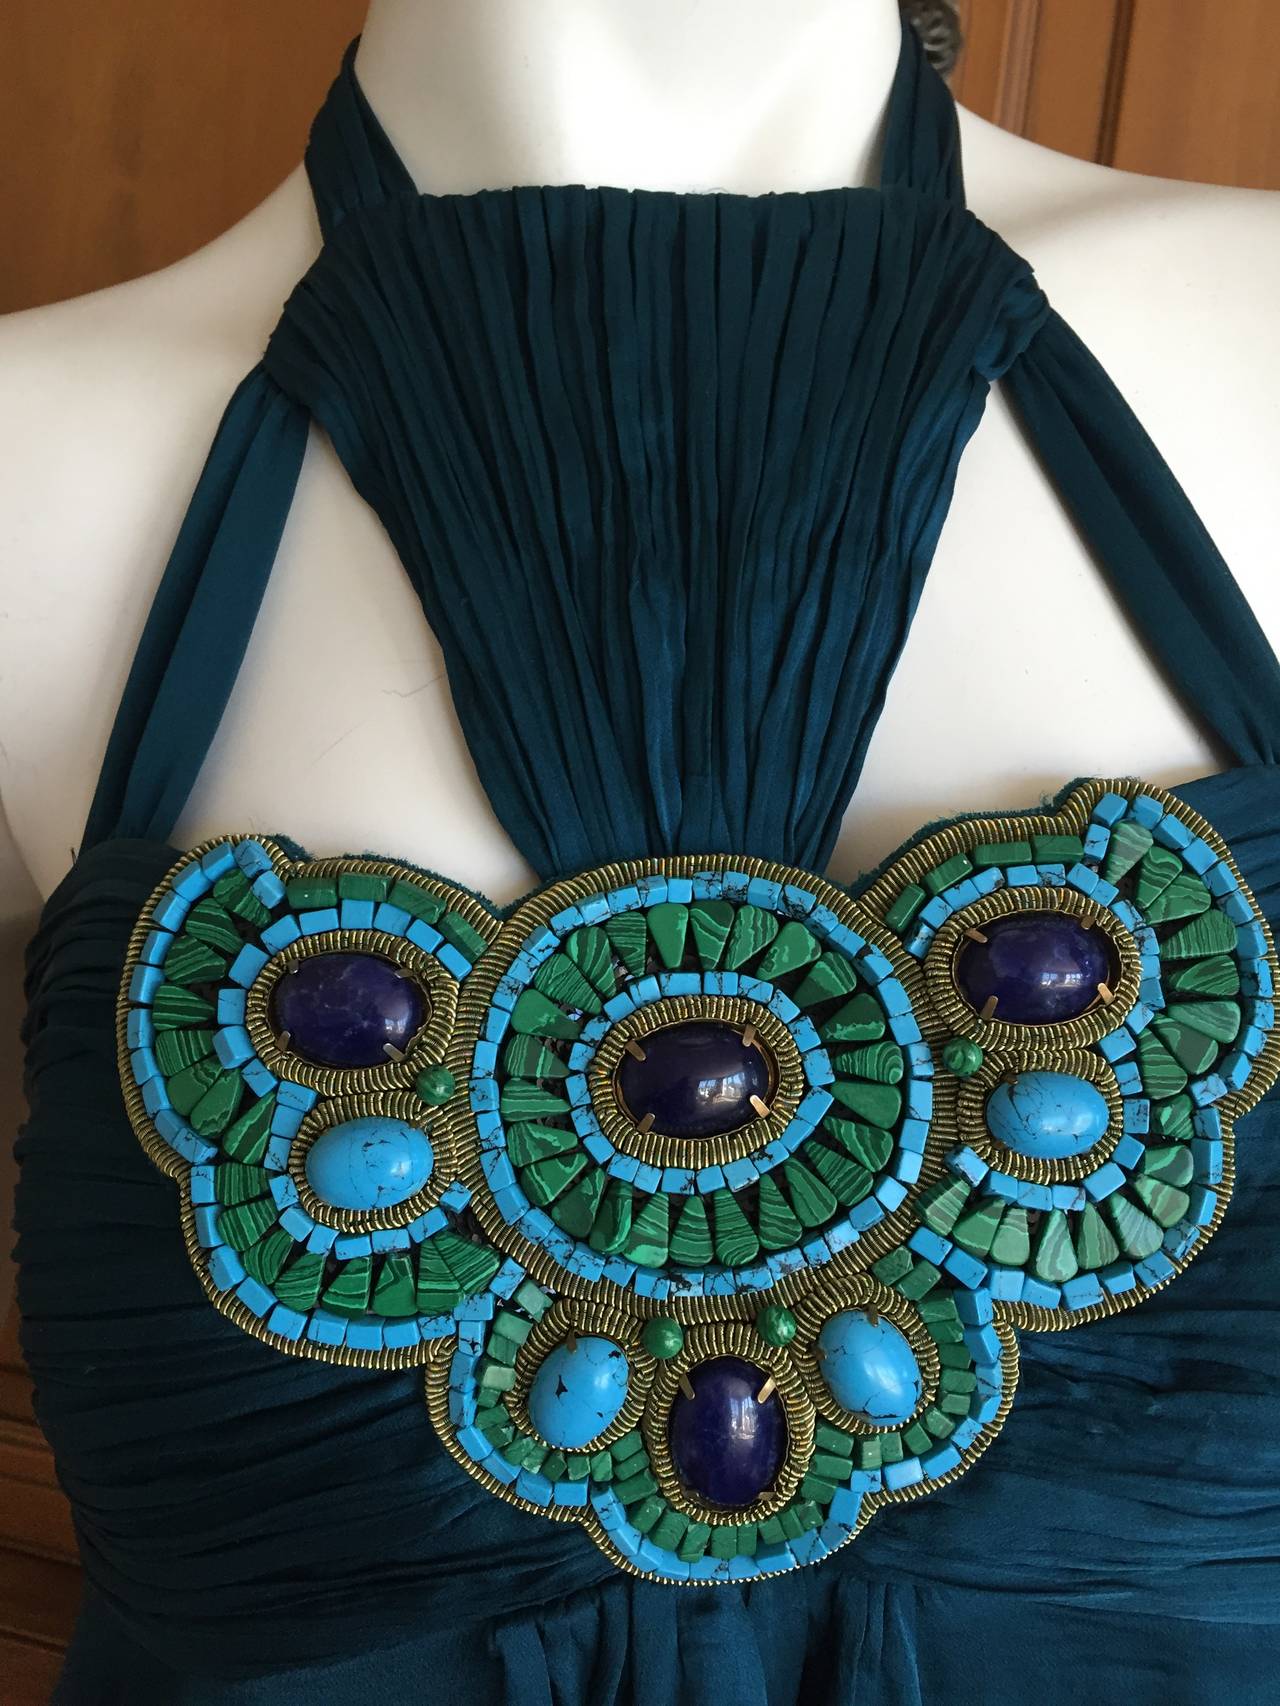 Andrew Gn Paris Peacock Blue Silk Dress w Turquoise & Malachite Jeweled Bust.
Size 38